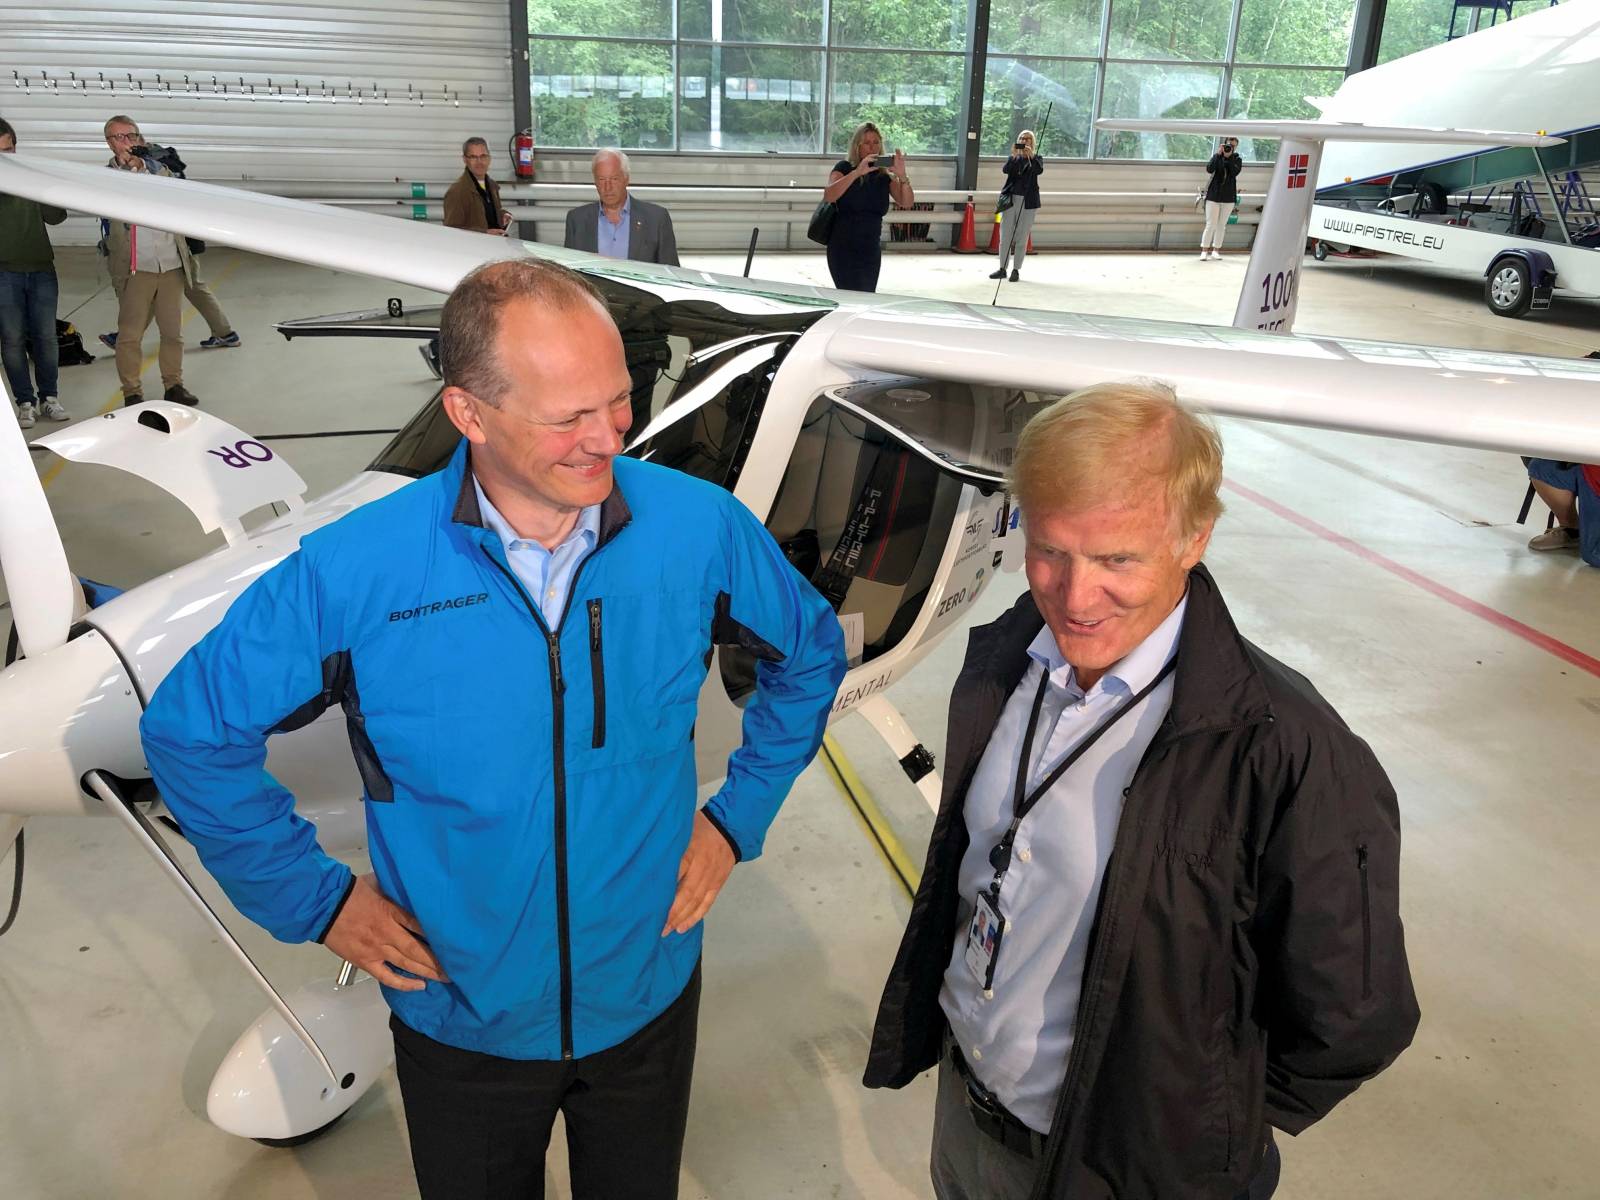 FILE PHOTO: Norwegian Transport Minister Ketil Solvik-Olsen and head of the Avinor Dag Falk-Petersen stand next to a two-seat electric plane made by Slovenian company Pipistrel at Oslo Airport